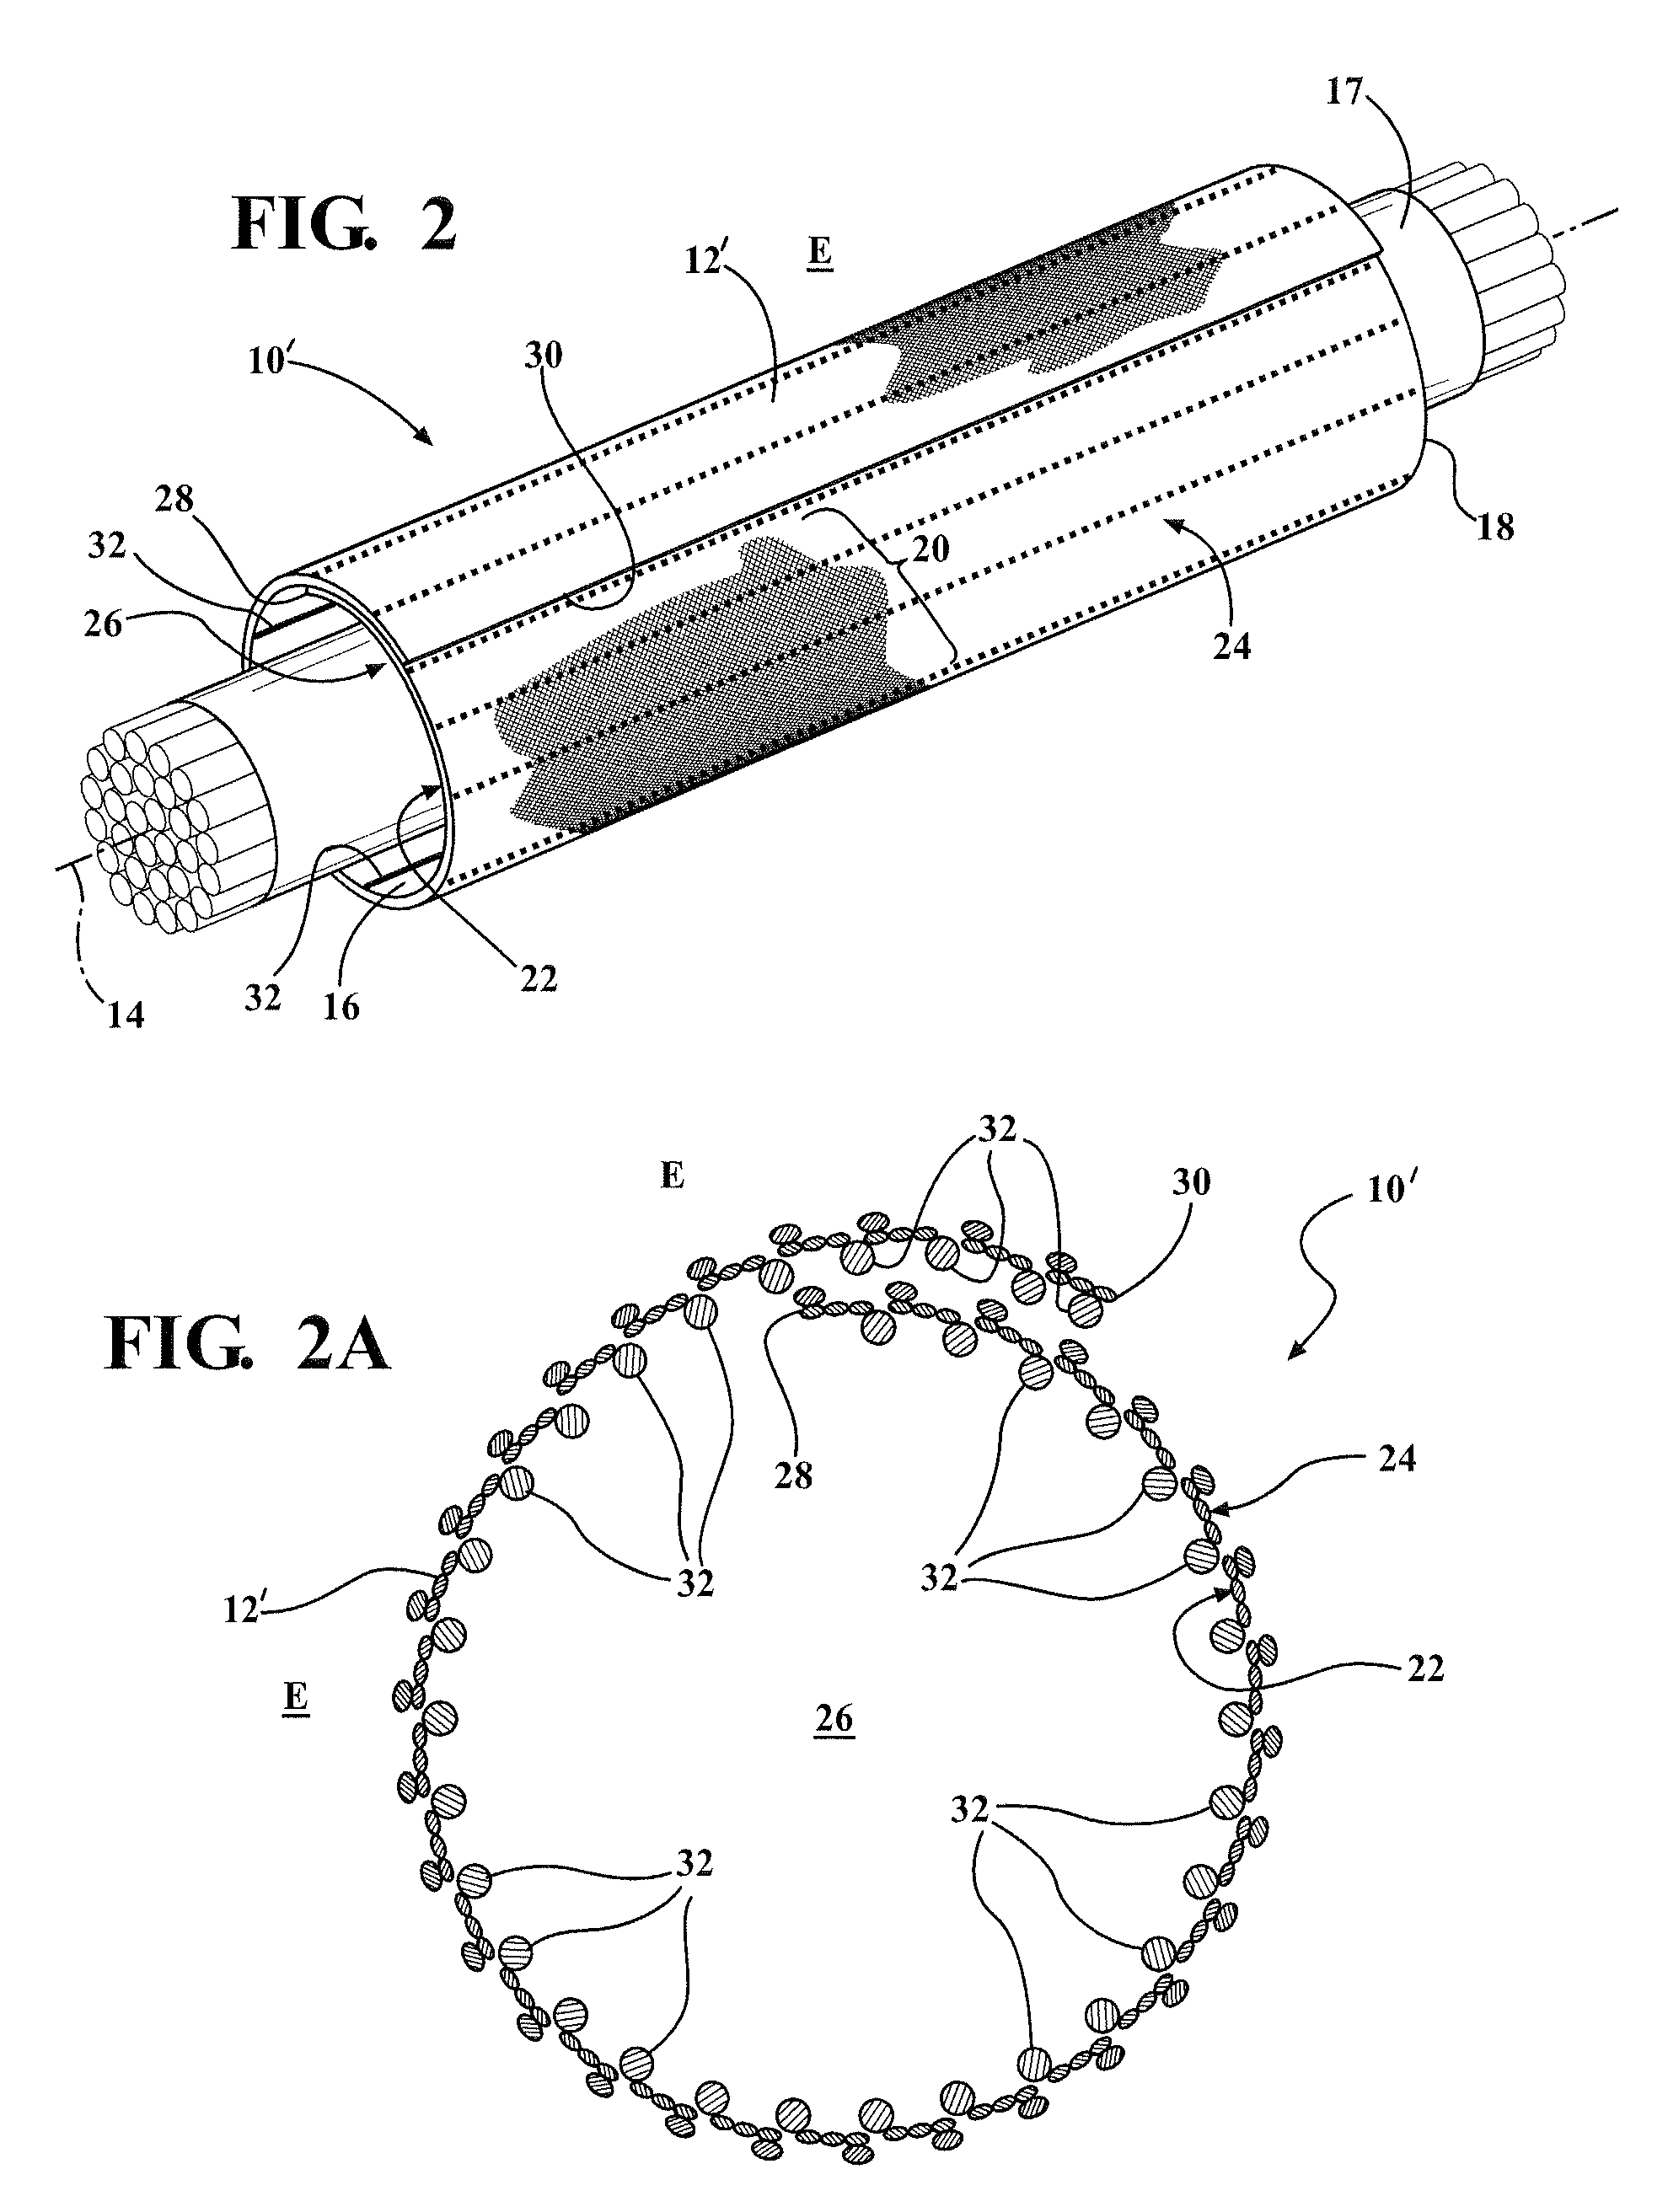 Enhanced braided sleeve and method of construction thereof